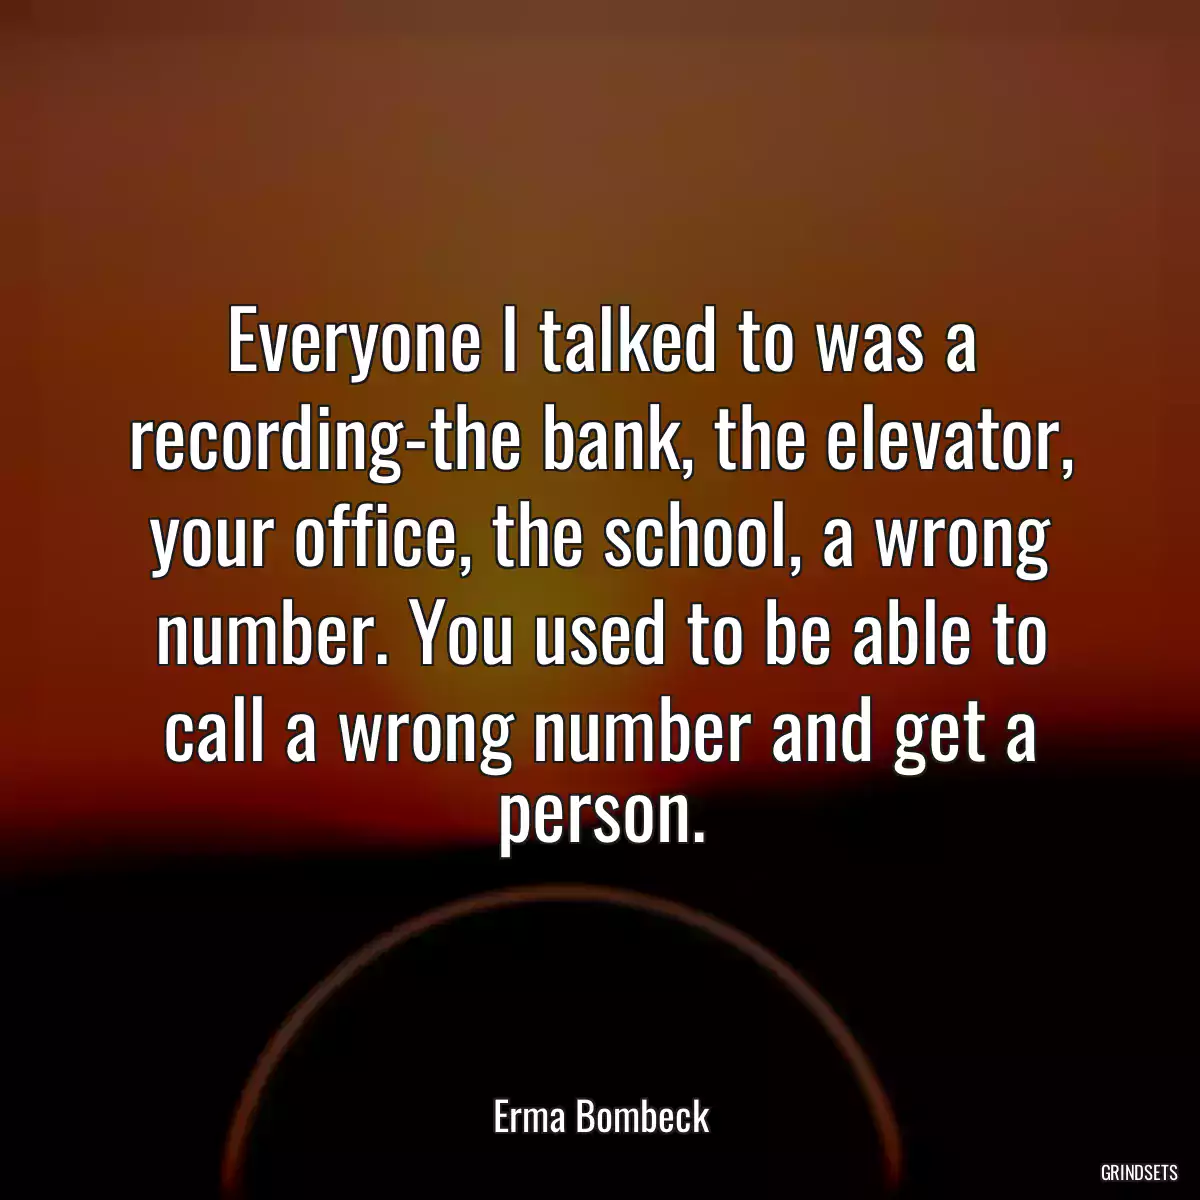 Everyone I talked to was a recording-the bank, the elevator, your office, the school, a wrong number. You used to be able to call a wrong number and get a person.